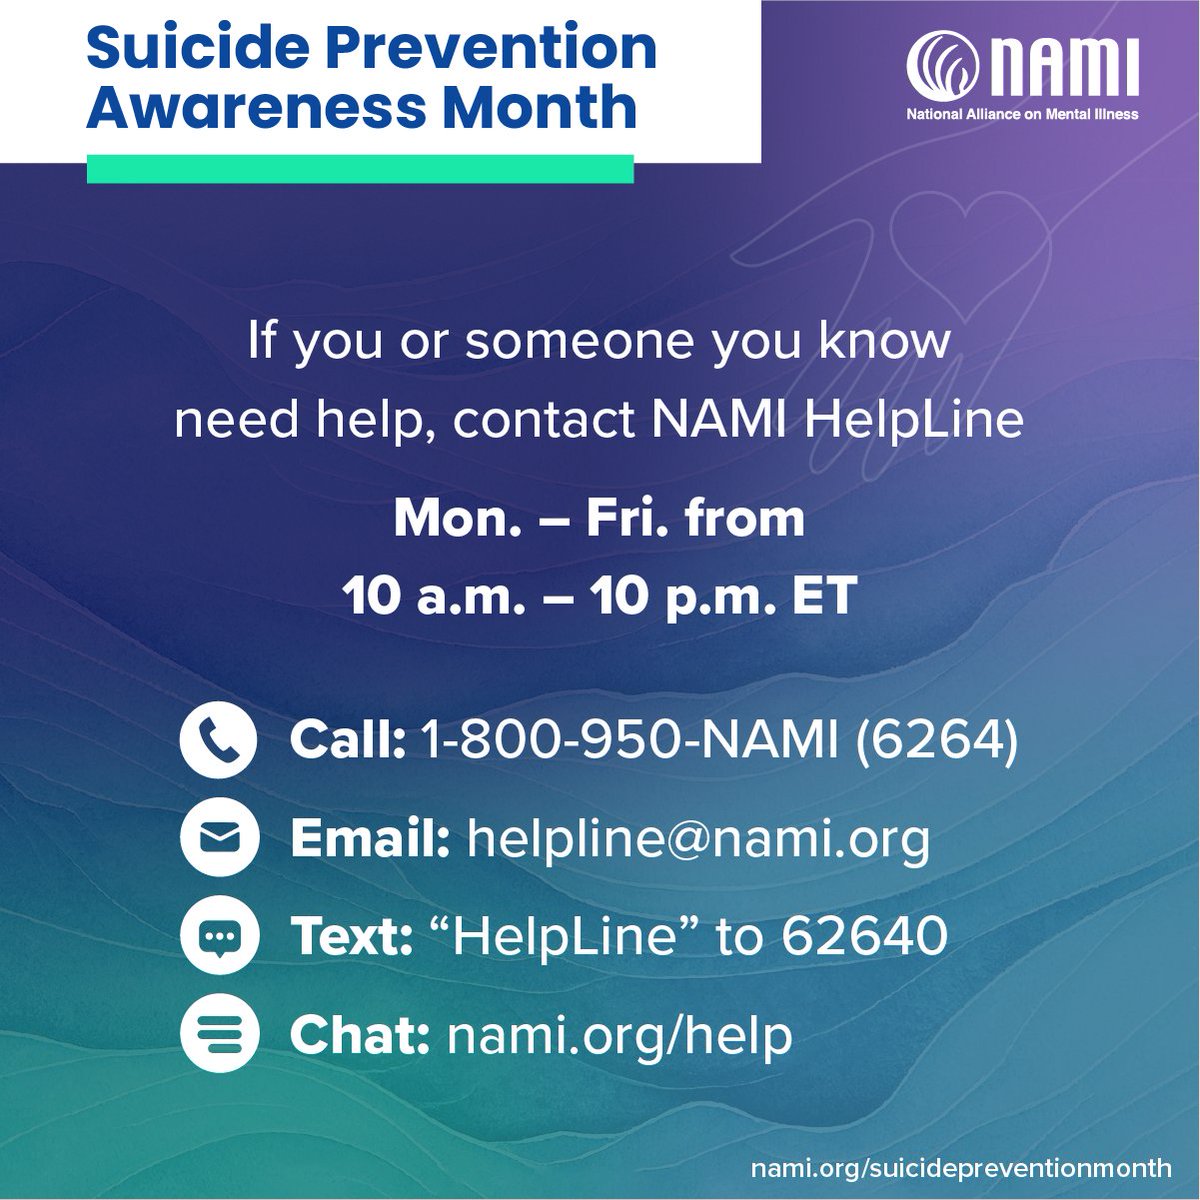 Share this resource with your family, friends, neighbors, and community. You never know what someone might be going through. #NotAlone #GiveHope #SuicideAwareness #NationalRecoveryMonth #Resource